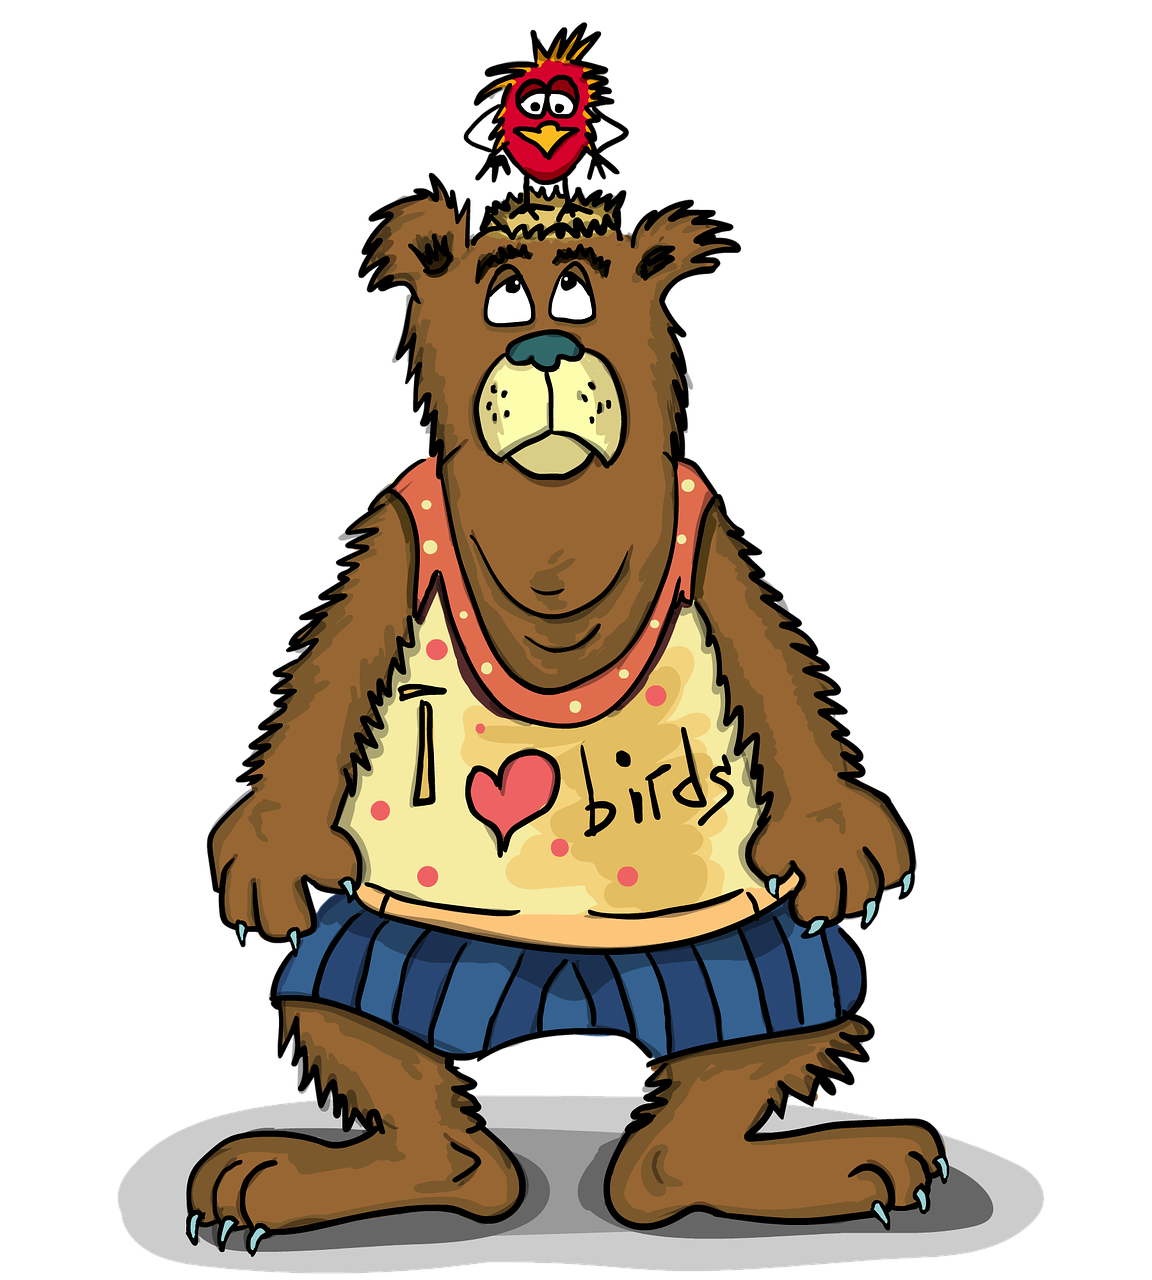 a cartoon bear wearing a shirt that says i love birds, an illustration of, by Jim Davis, flickr, !!! very coherent!!! vector art, on black background, wearing a tank top and shorts, cartoon style illustration